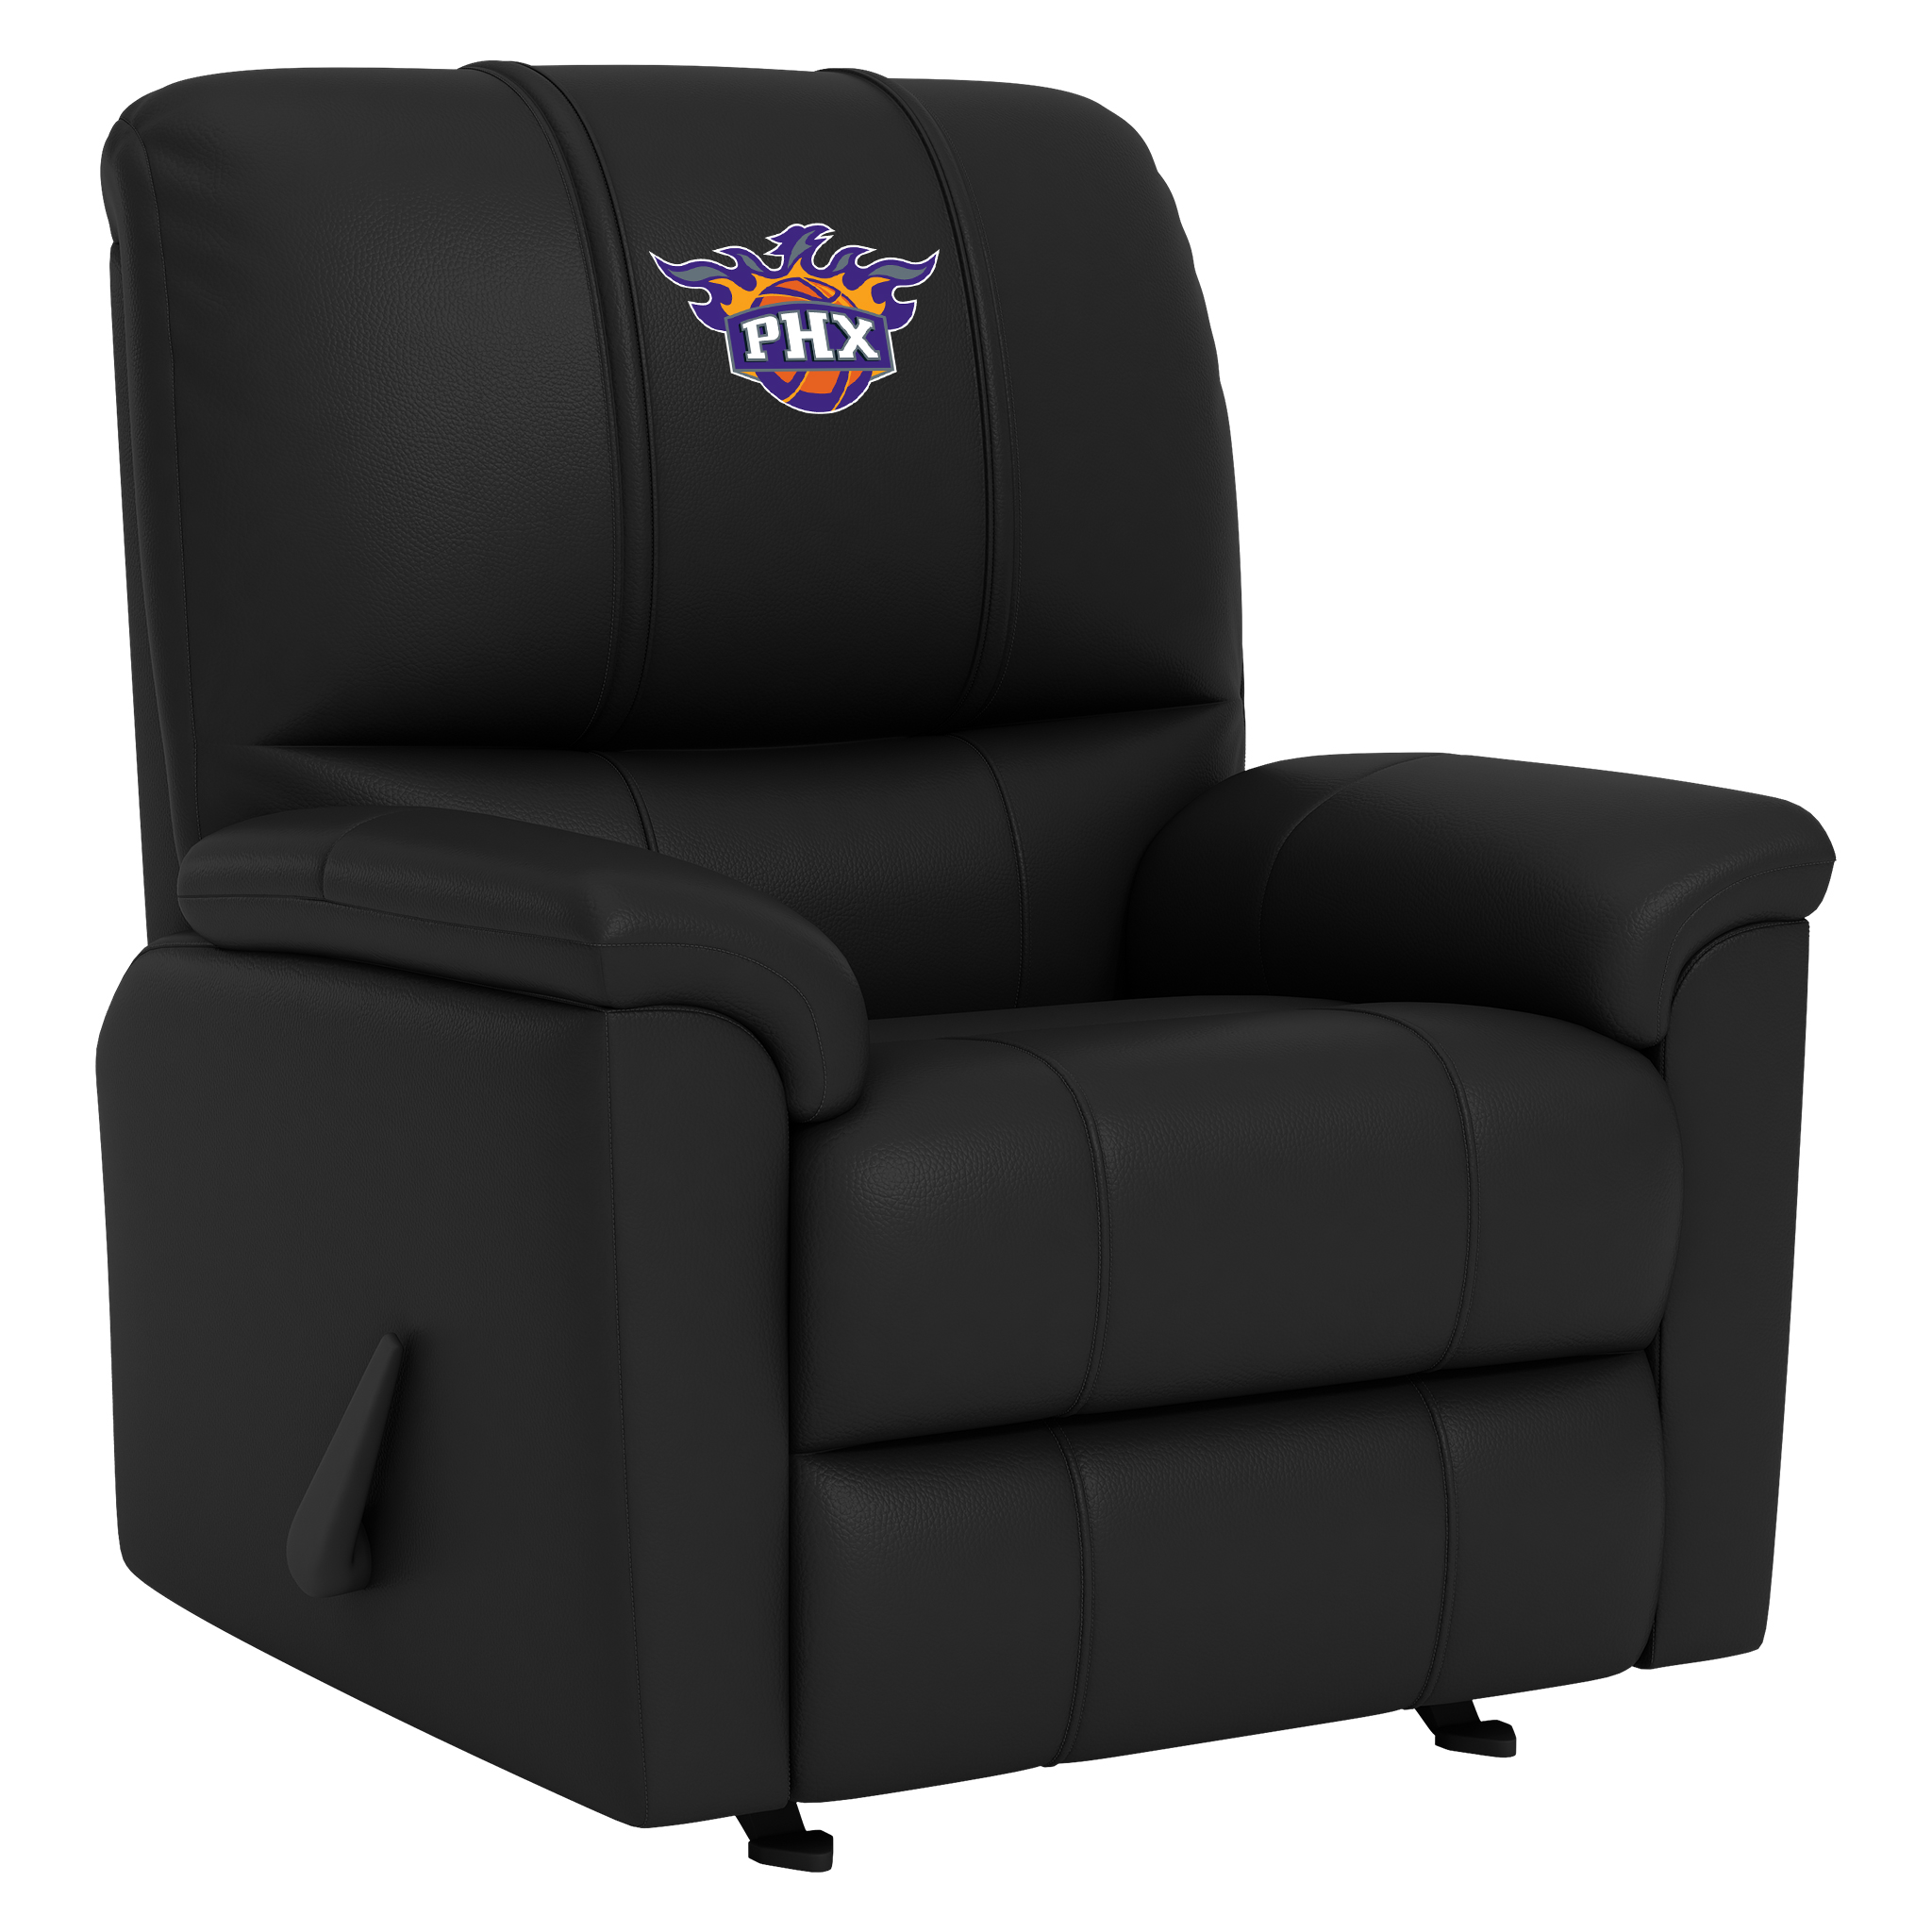 Minnesota Timberwolves Silver Club Chair with Minnesota Timberwolves Secondary Logo